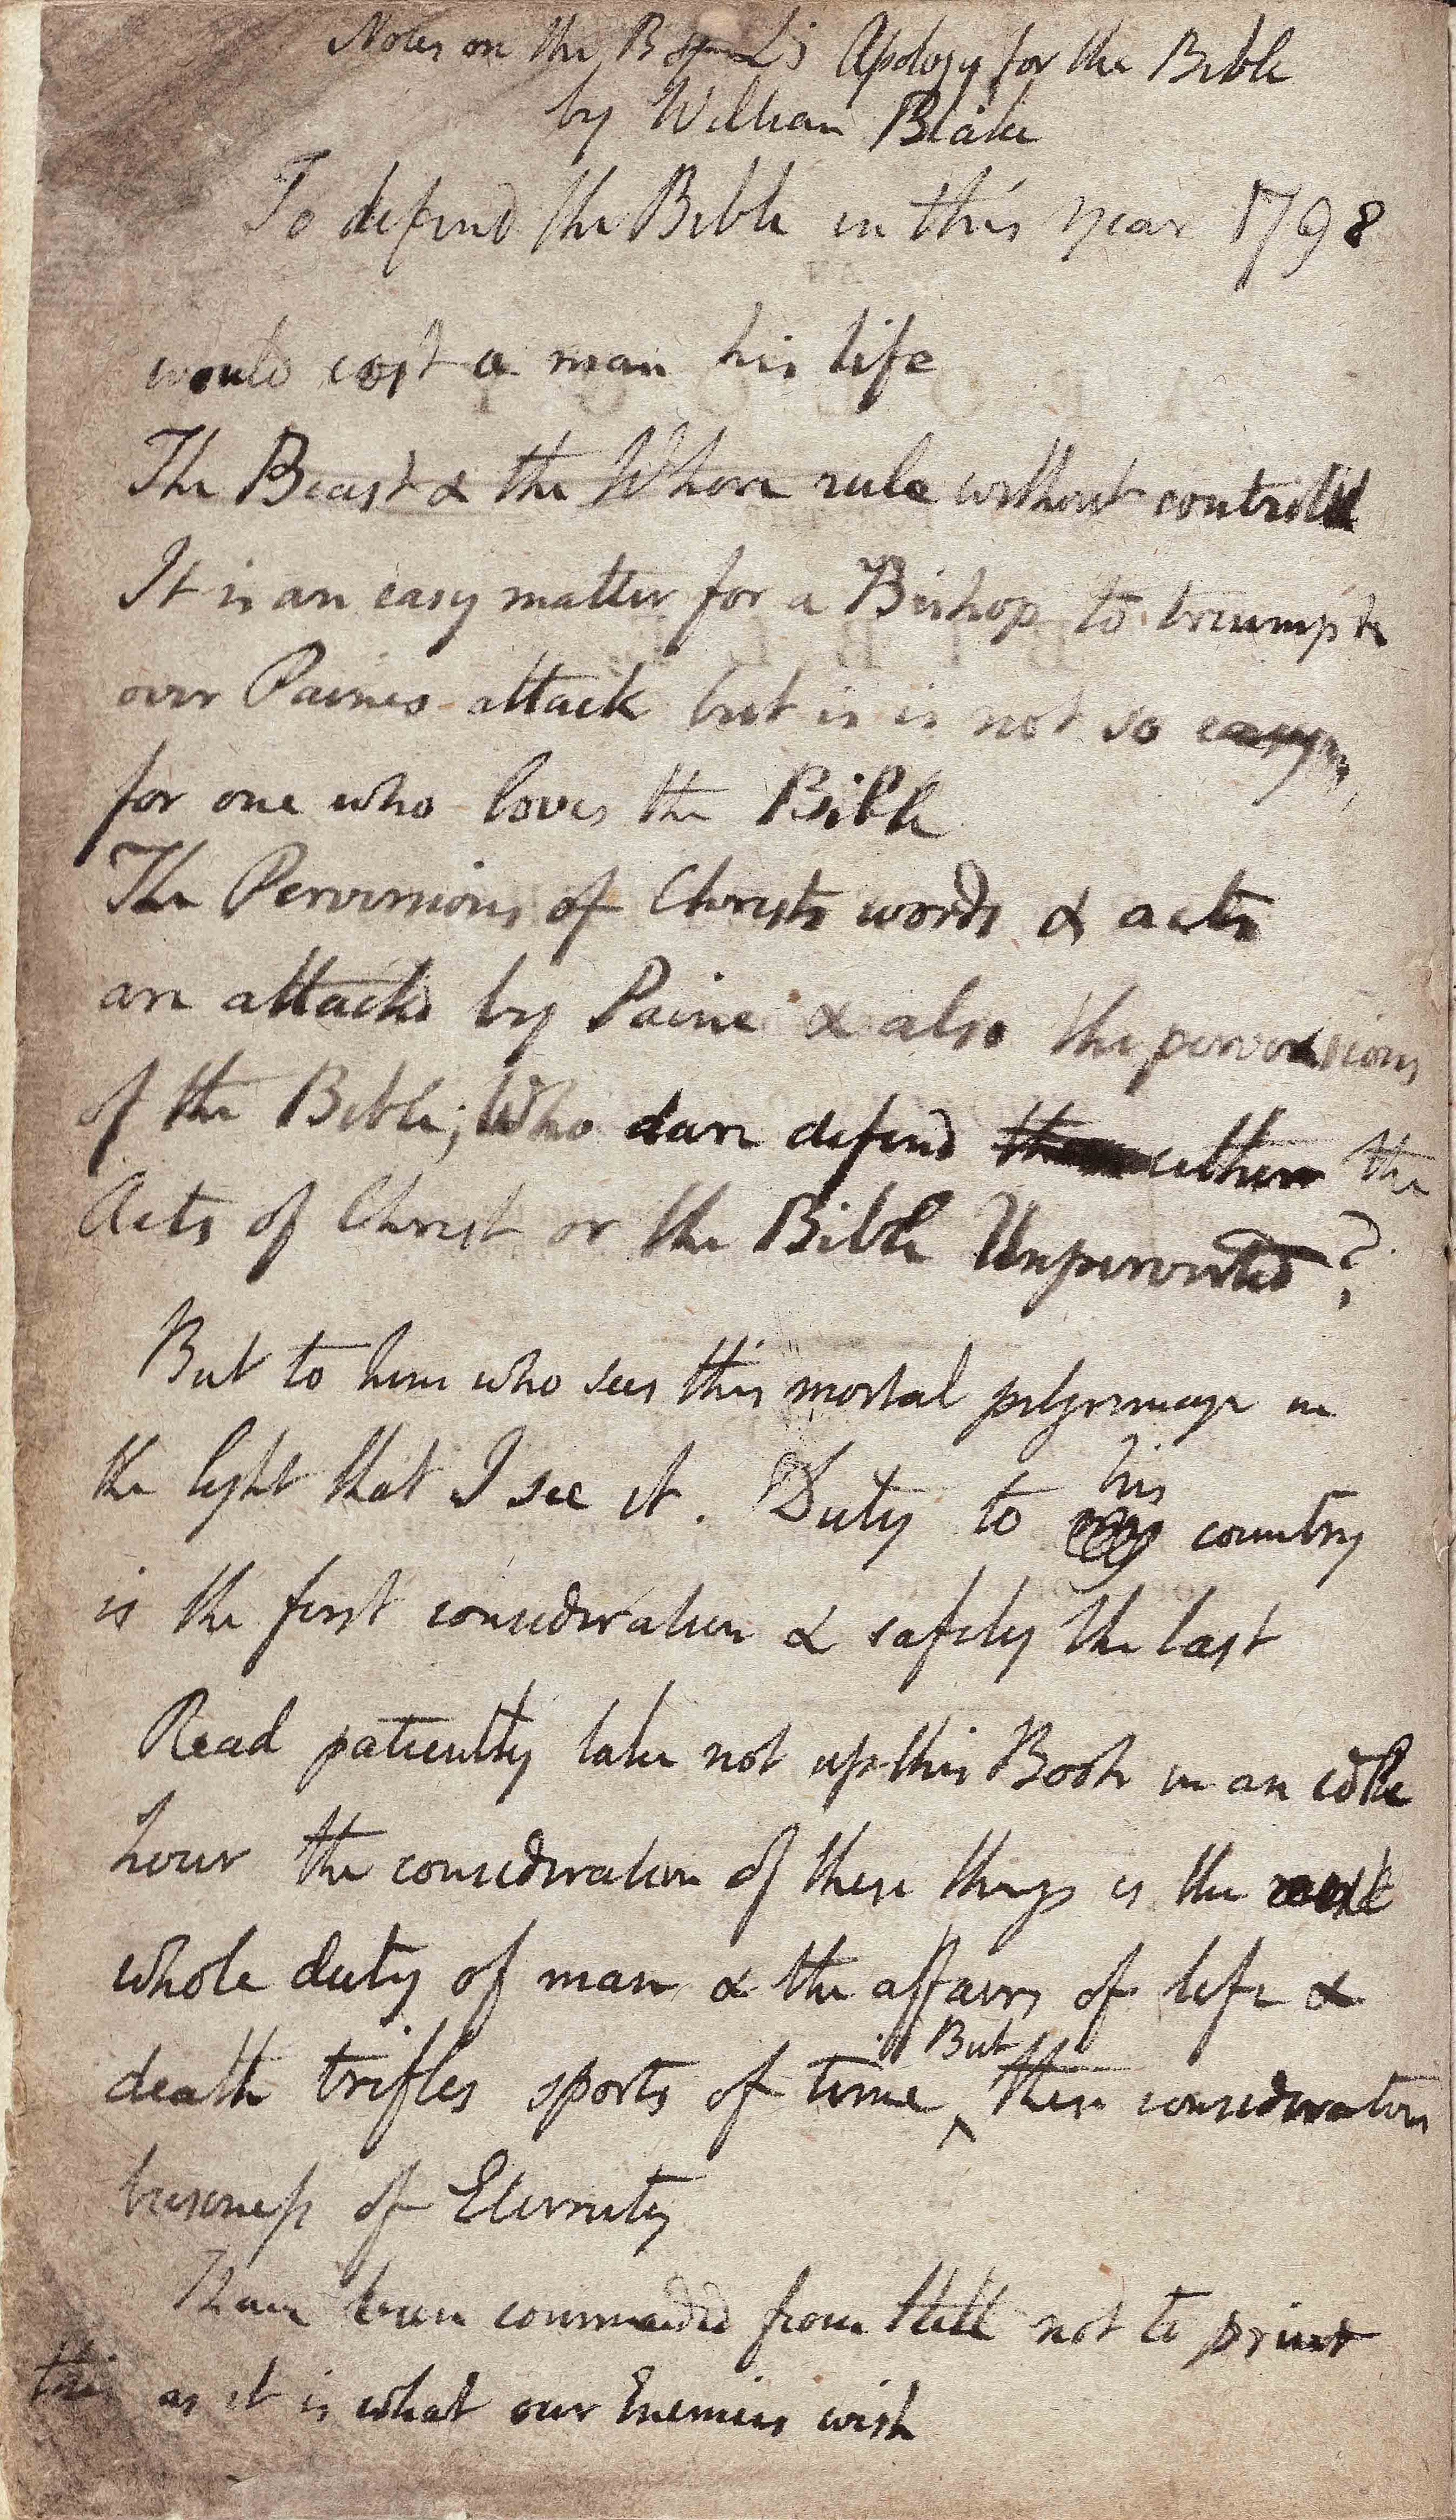 Notes on the Bishop’s Apology for the Bible by William Blake To defend the Bible in the year
1798 would cost a man his life  The Beast + the Whore rule without controlx It is an easy matter for a Bishop
to triumph over Paines attack but it is not so easy for one who loves the Bible The Perversions of Christs
words + acts are attackd by Paine + also the perversions of the Bible; Who dare defend either the Acts of
Christ or the Bible Unperverted? But to him to sees this mortal pilgrimage in the light that I see it. Duty to
his country is the first consideration + safety the last Read patiently take not up this Book in an idle hour
the consideration of these things is the whole duty of man + the affairs of life + death trifles sports of
time But these considerations business of Eternity I have been commanded from Hell not to print this as it is
what our Enemies wish